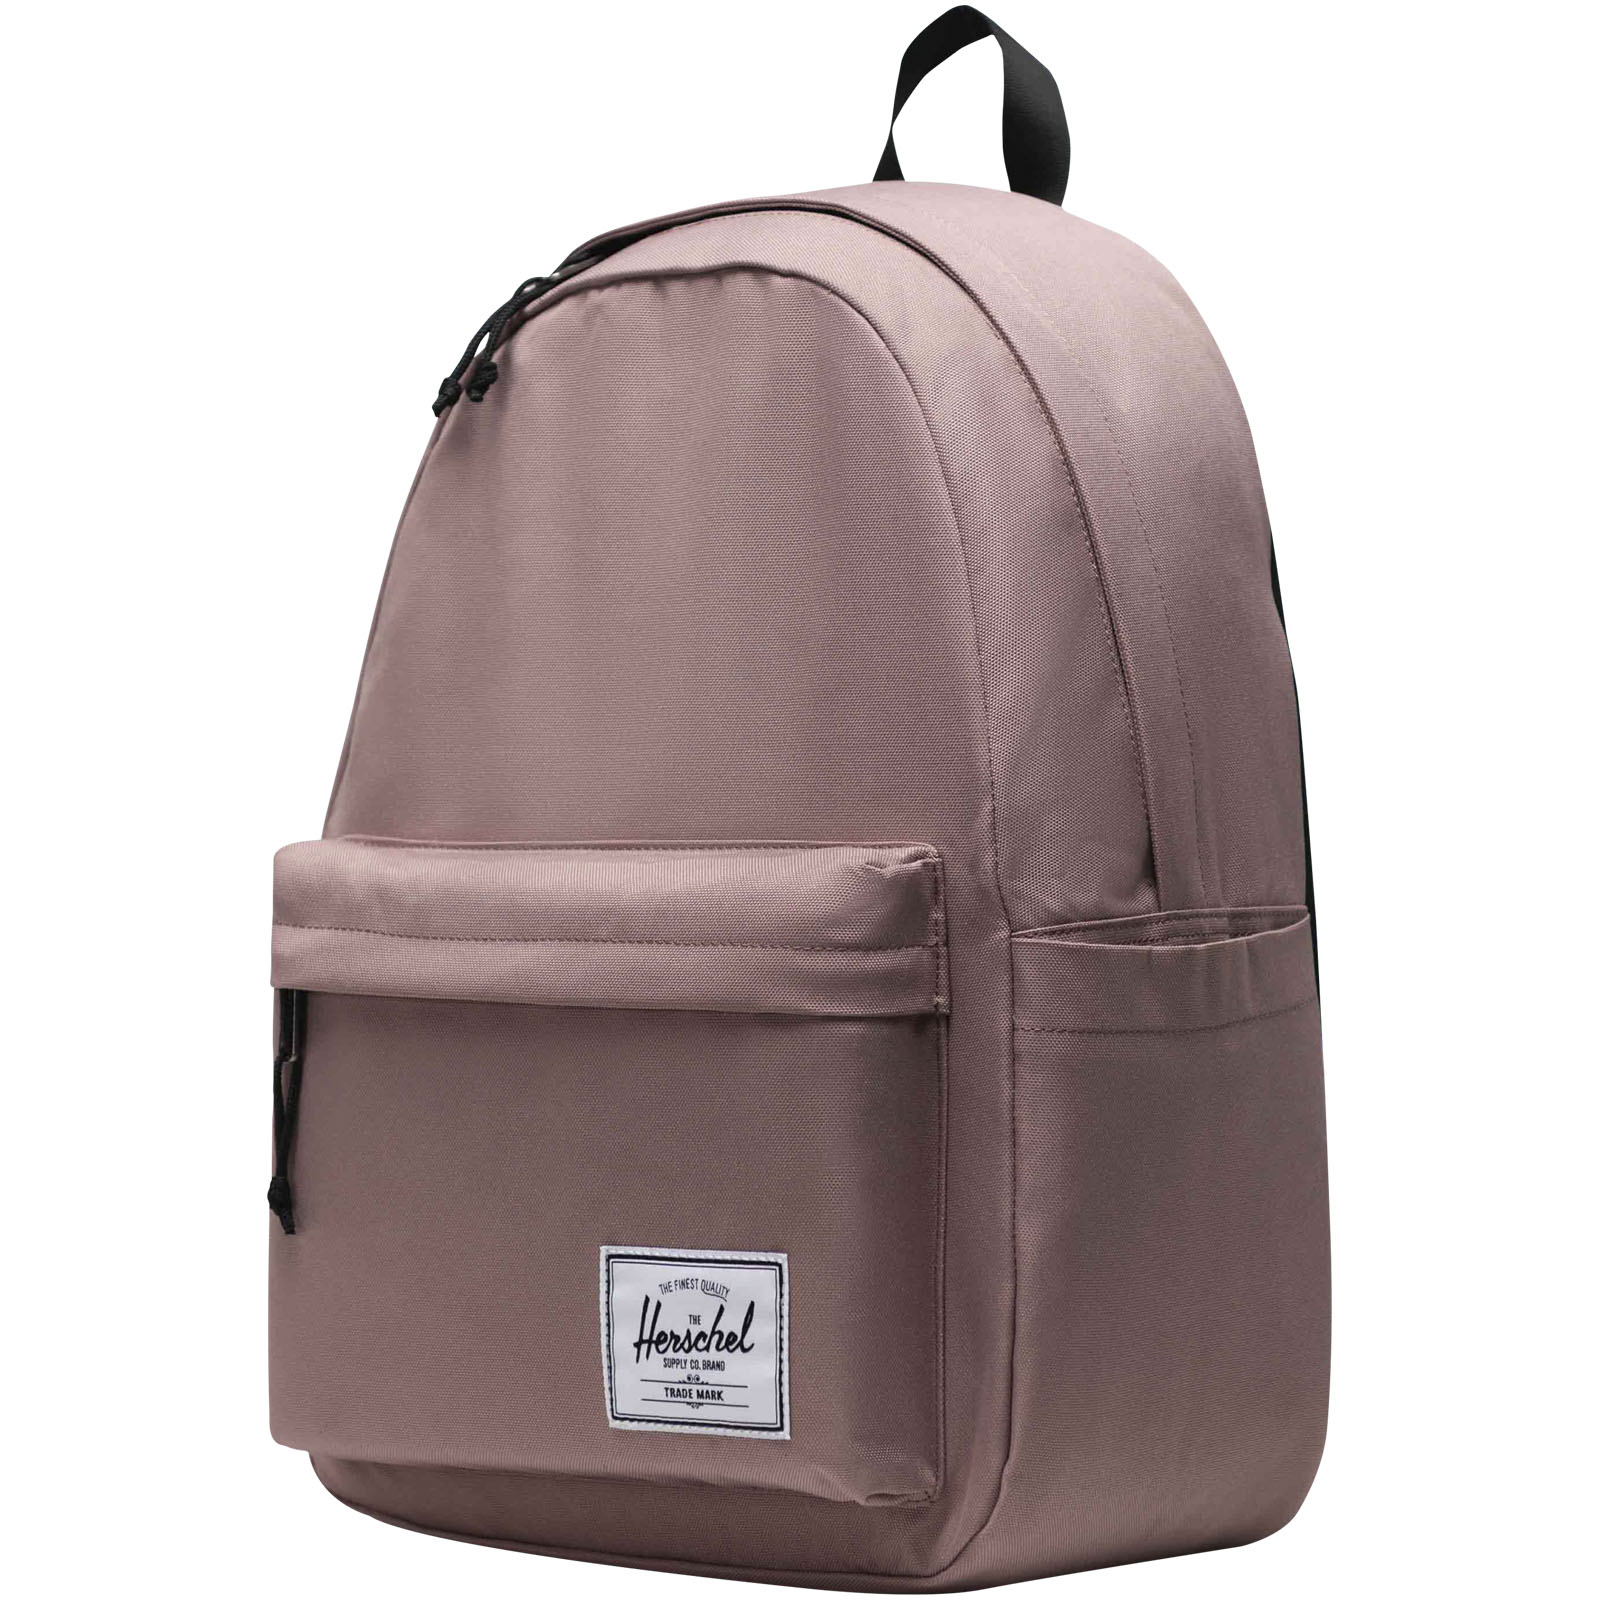 Backpacks - Herschel Classic™ recycled laptop backpack 26L